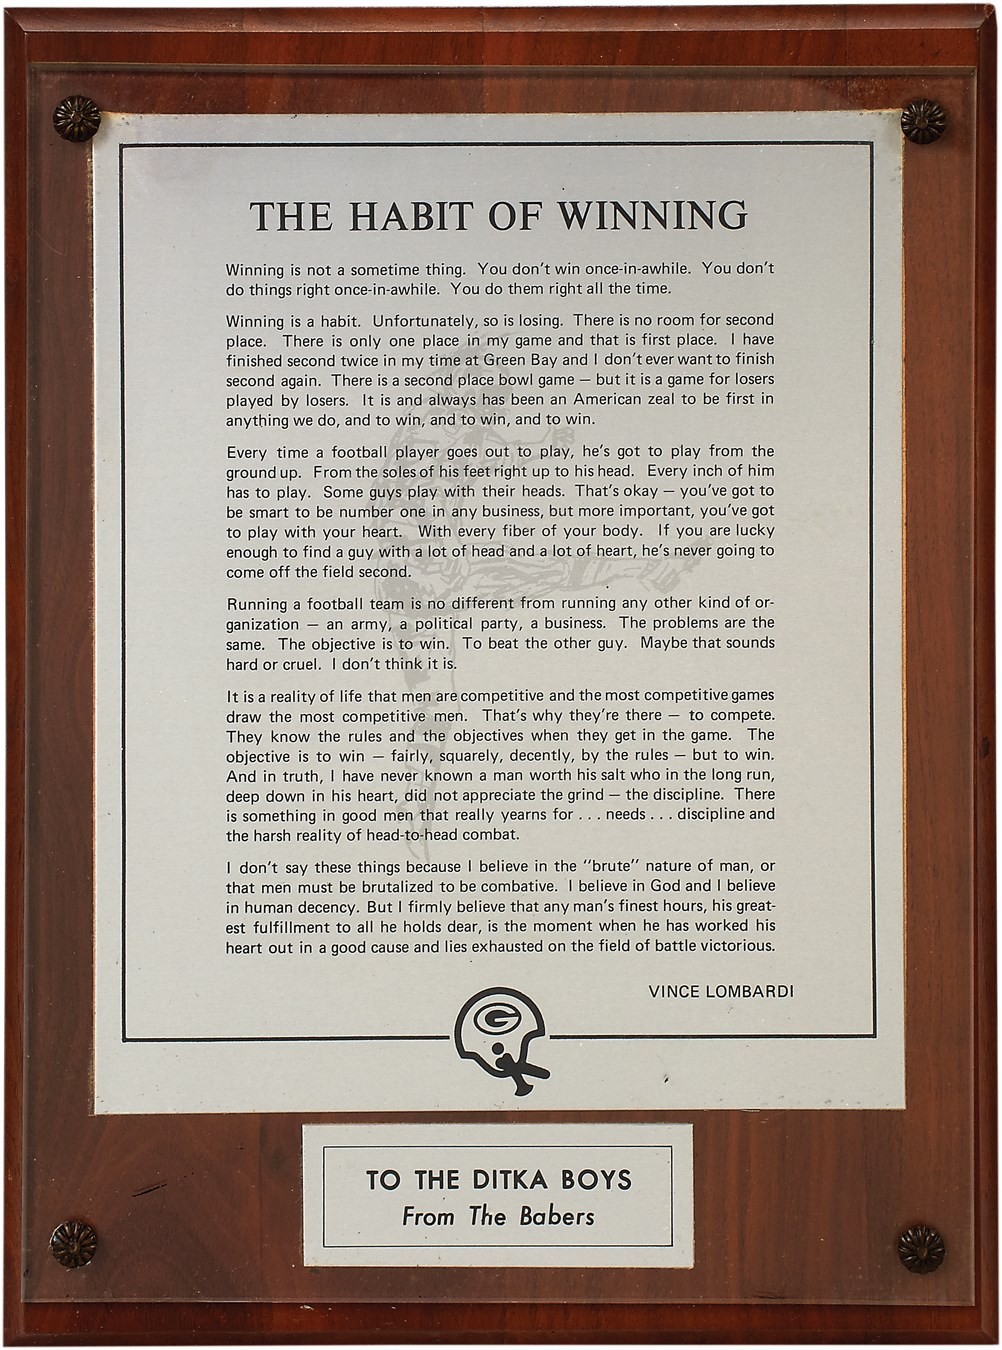 Football - Vince Lombardi "The Habit of Winning" Declaration to Mike Ditka